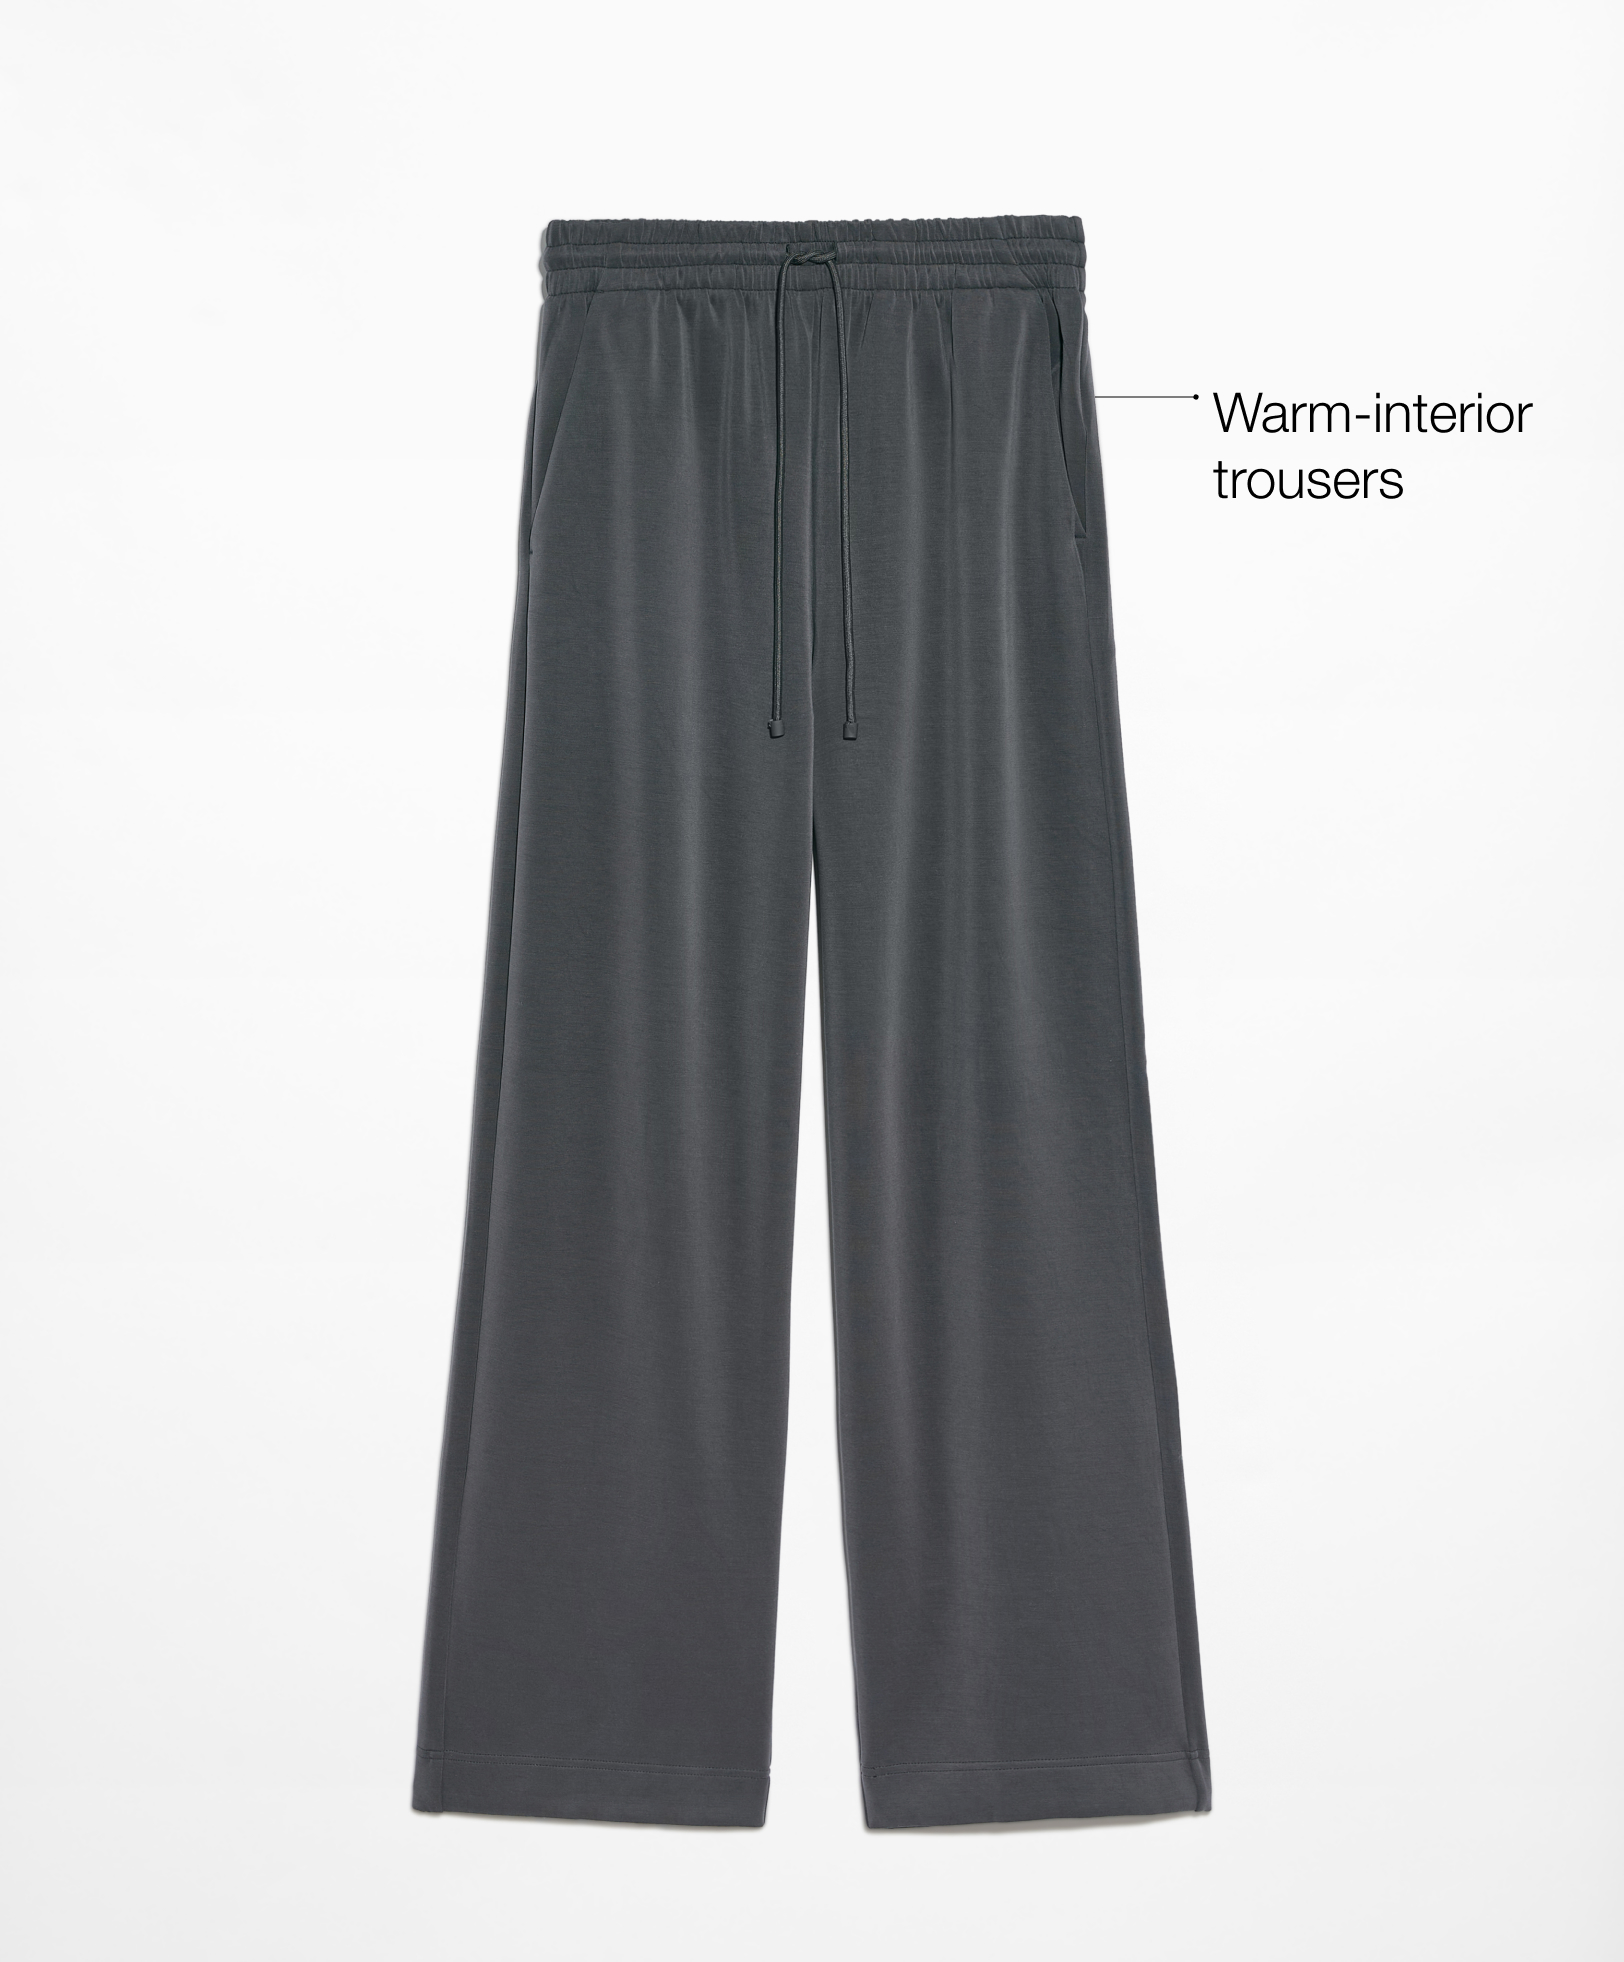 Relaxed straight-leg warm-interior trousers with modal